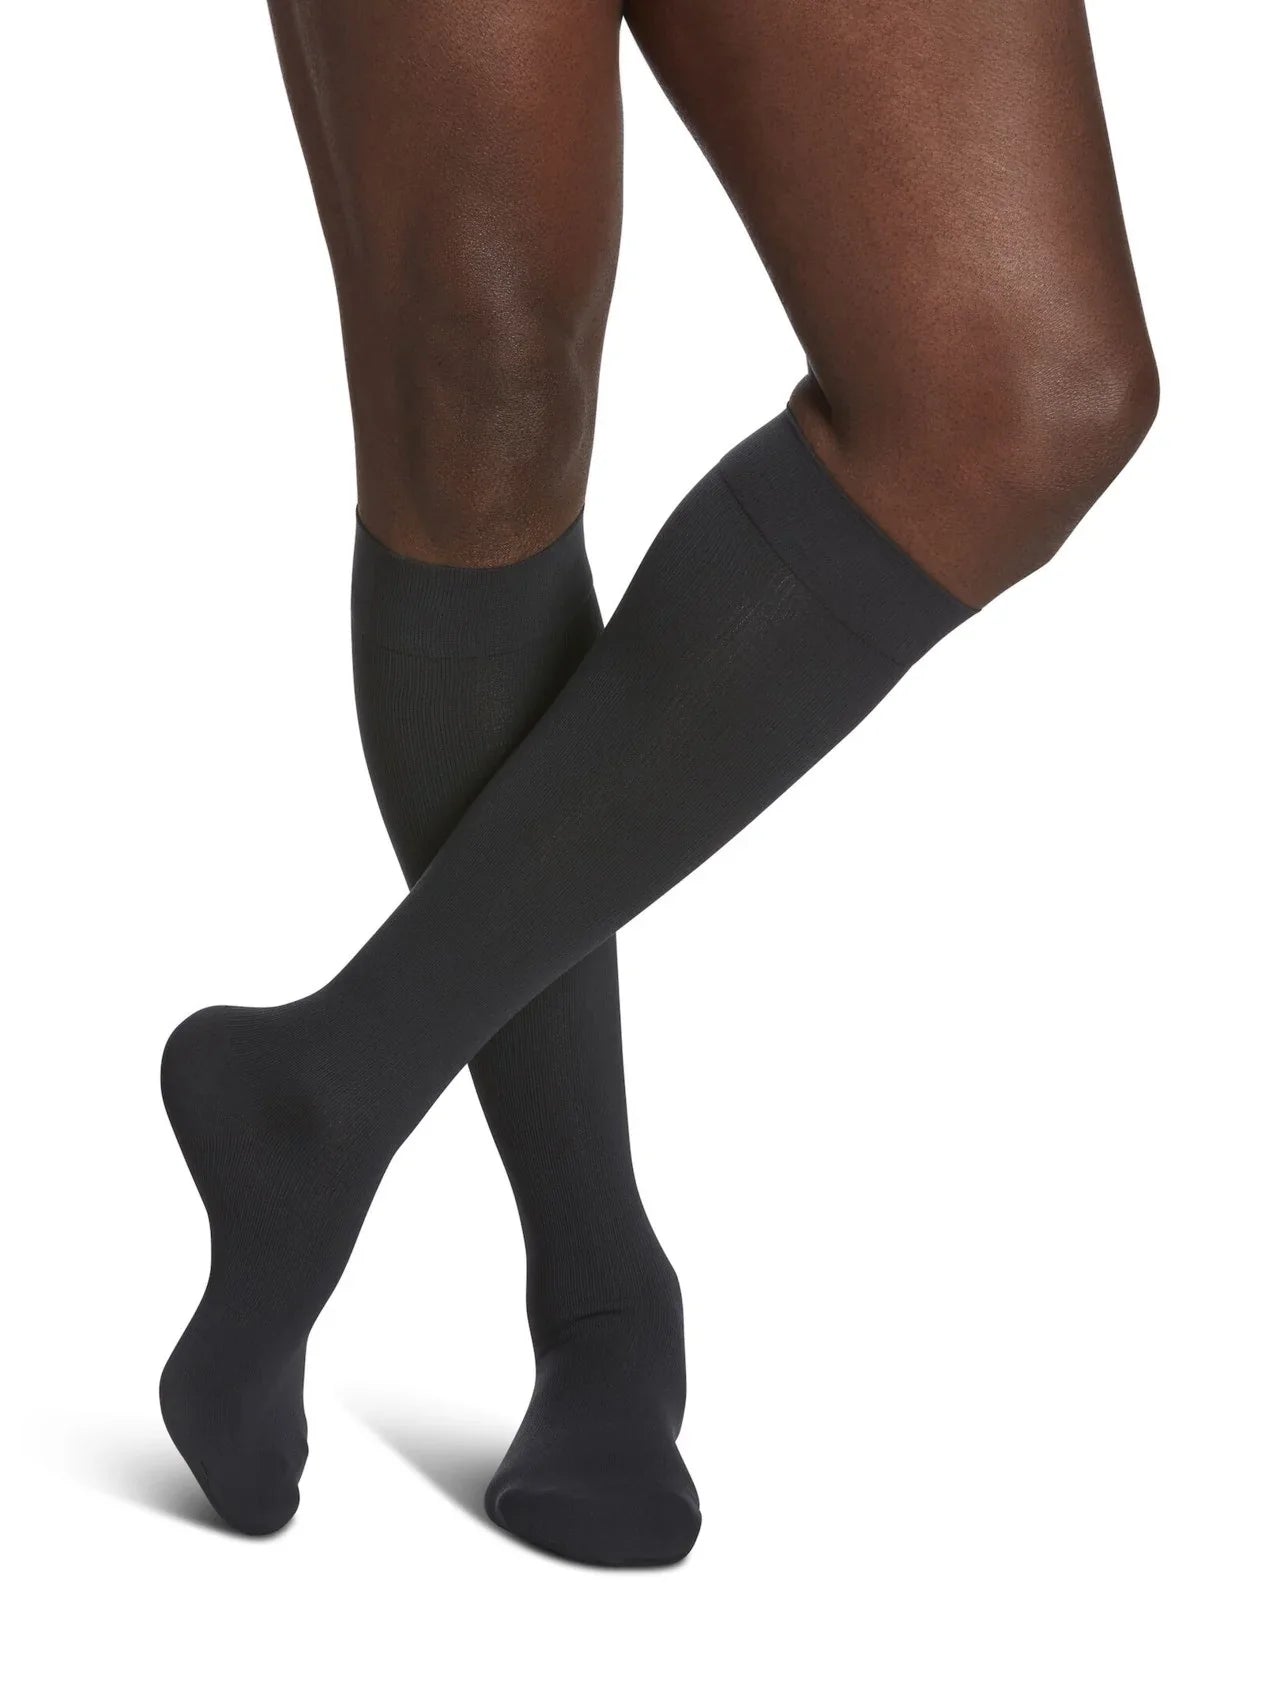 Sigvaris 230 Essential Cotton Compression Socks 30-40 mmHg Calf High for Unisex Closed Toe